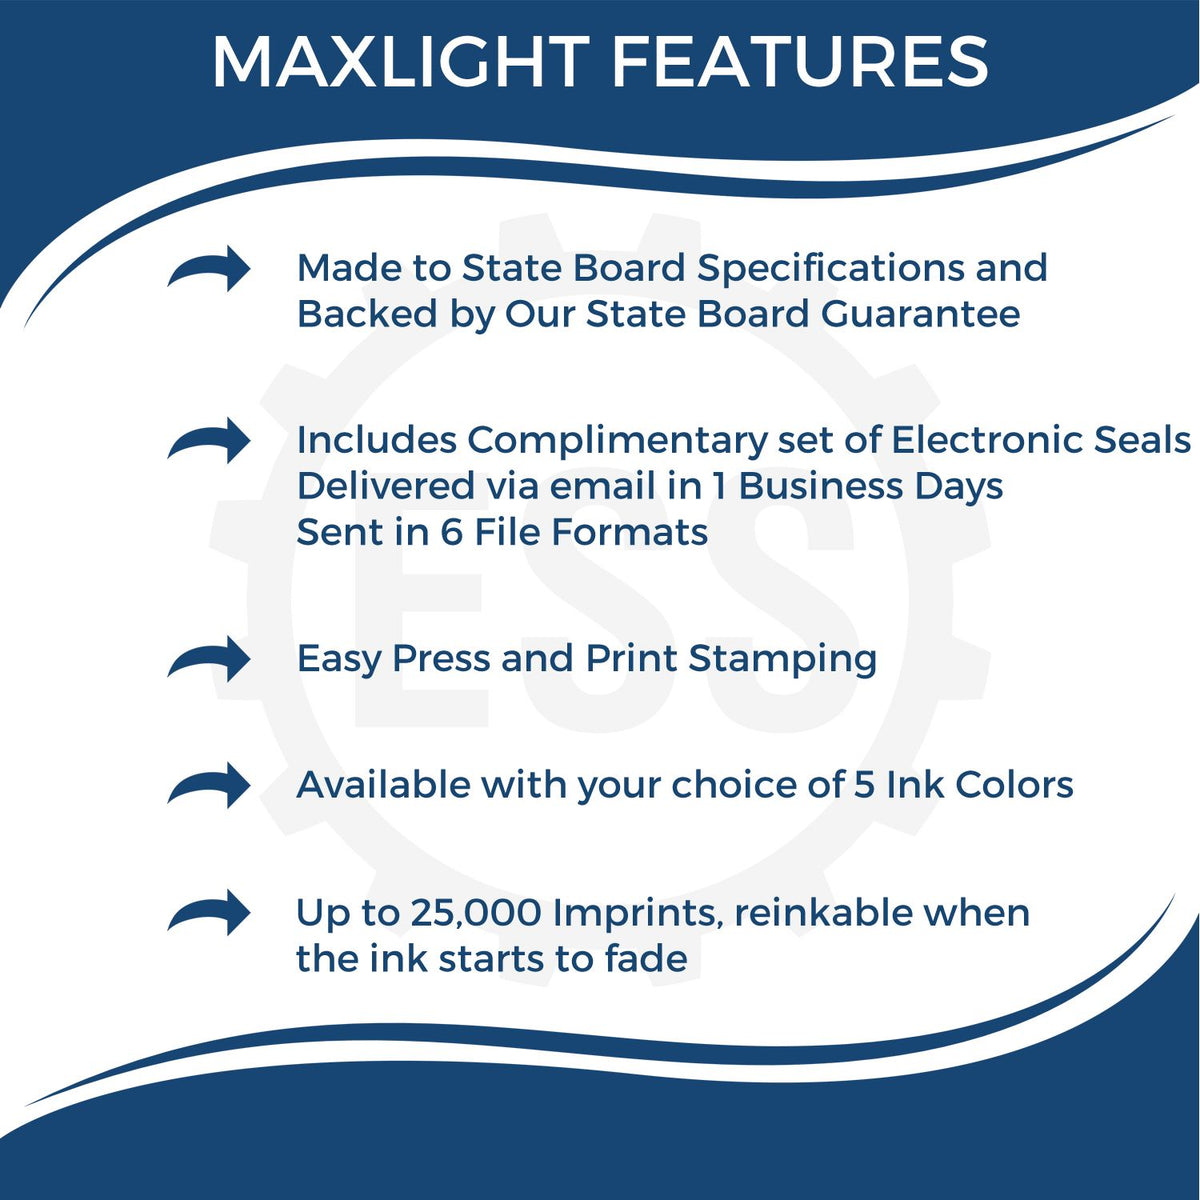 A picture of an infographic highlighting the selling points for the Premium MaxLight Pre-Inked Arkansas Geology Stamp